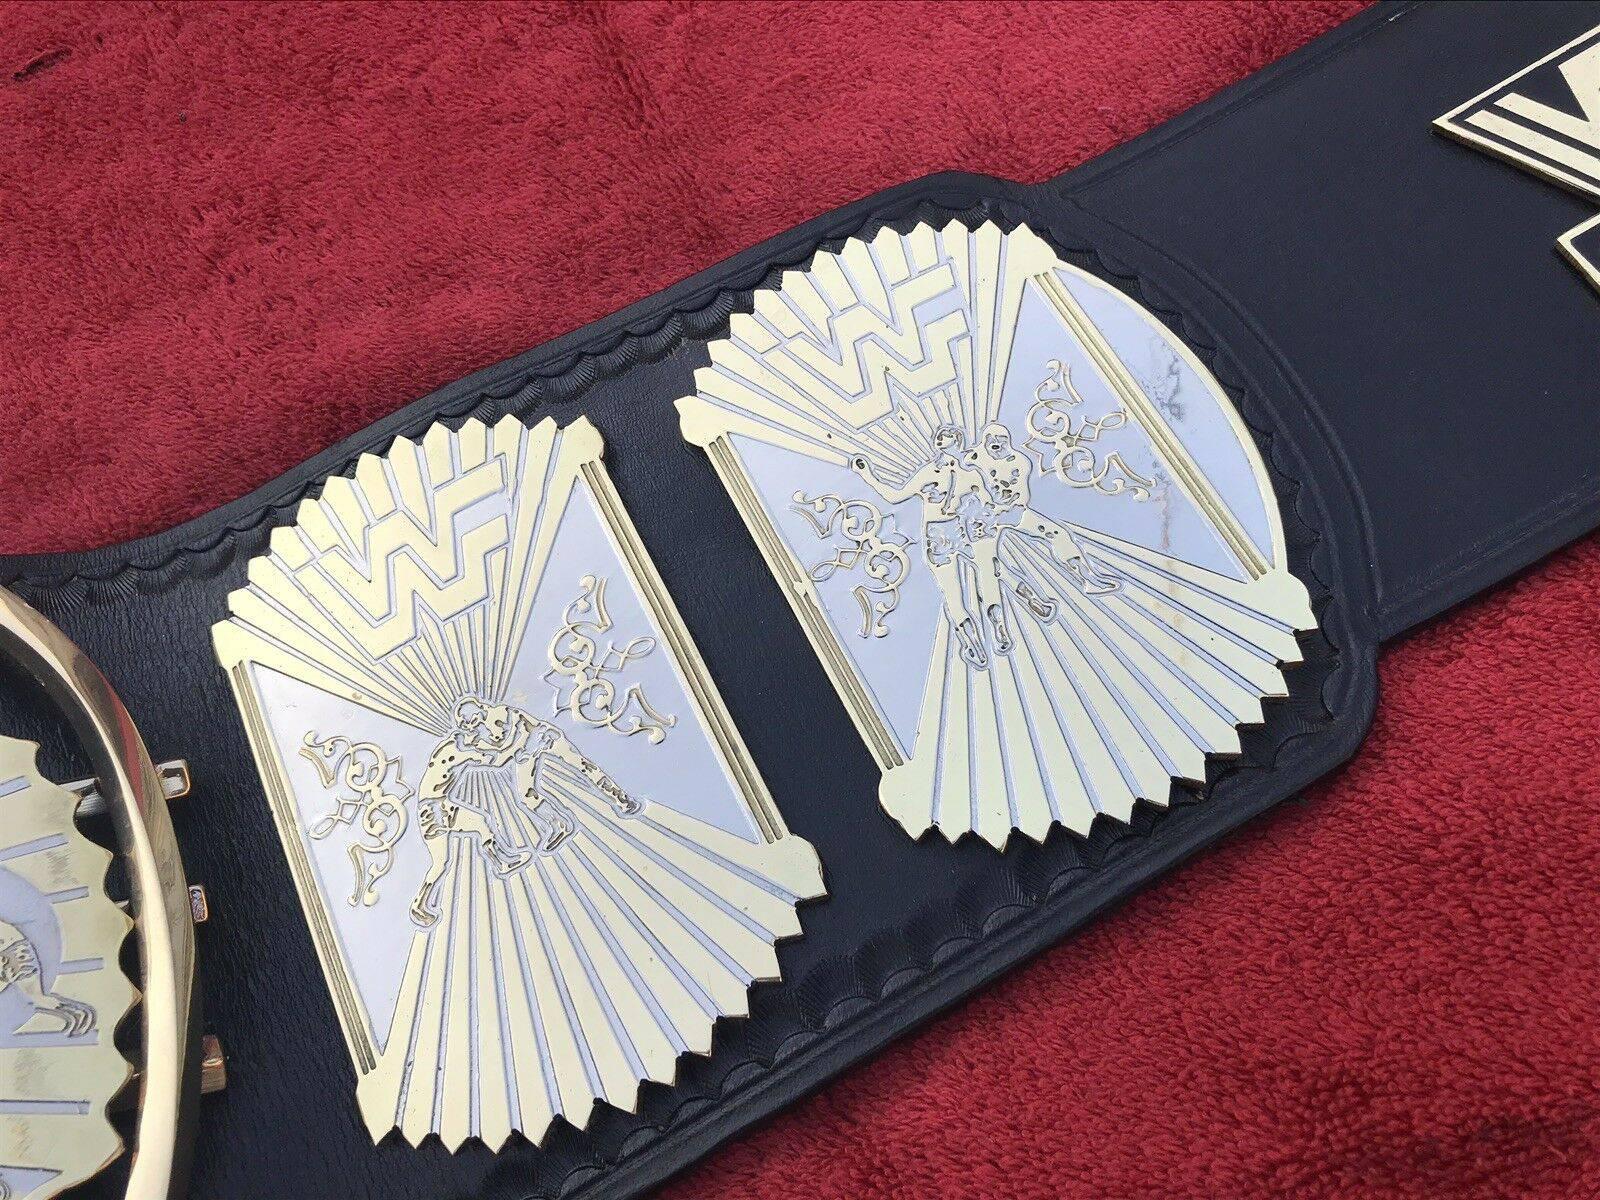 WWF WINGED EAGLE DUAL PLATED Brass Championship Title Belt - Zees Belts